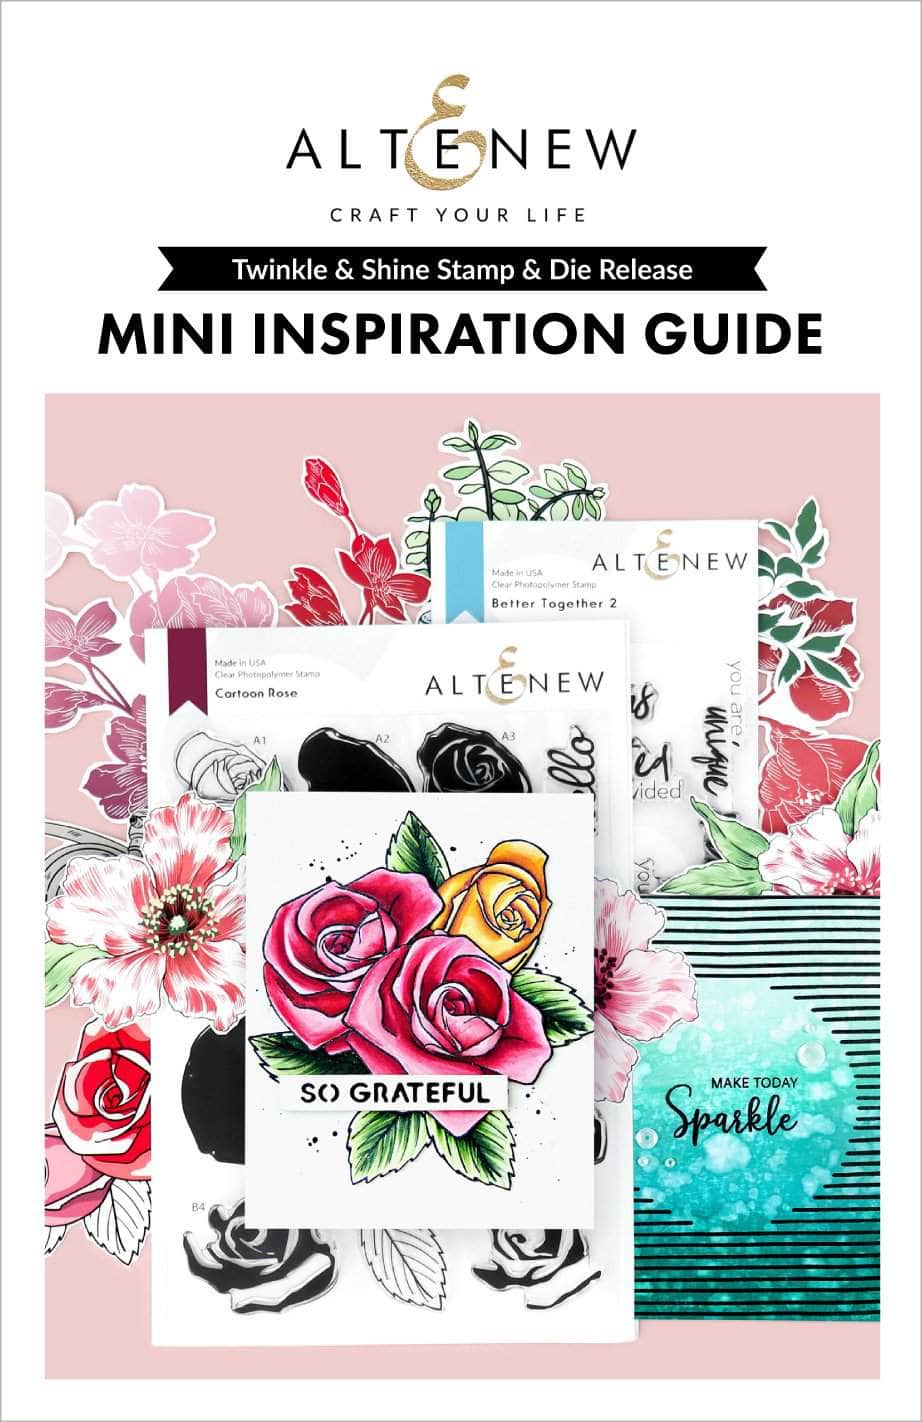 Printed Media Twinkle & Shine Stamp & Die Release Mini Inspiration Guide